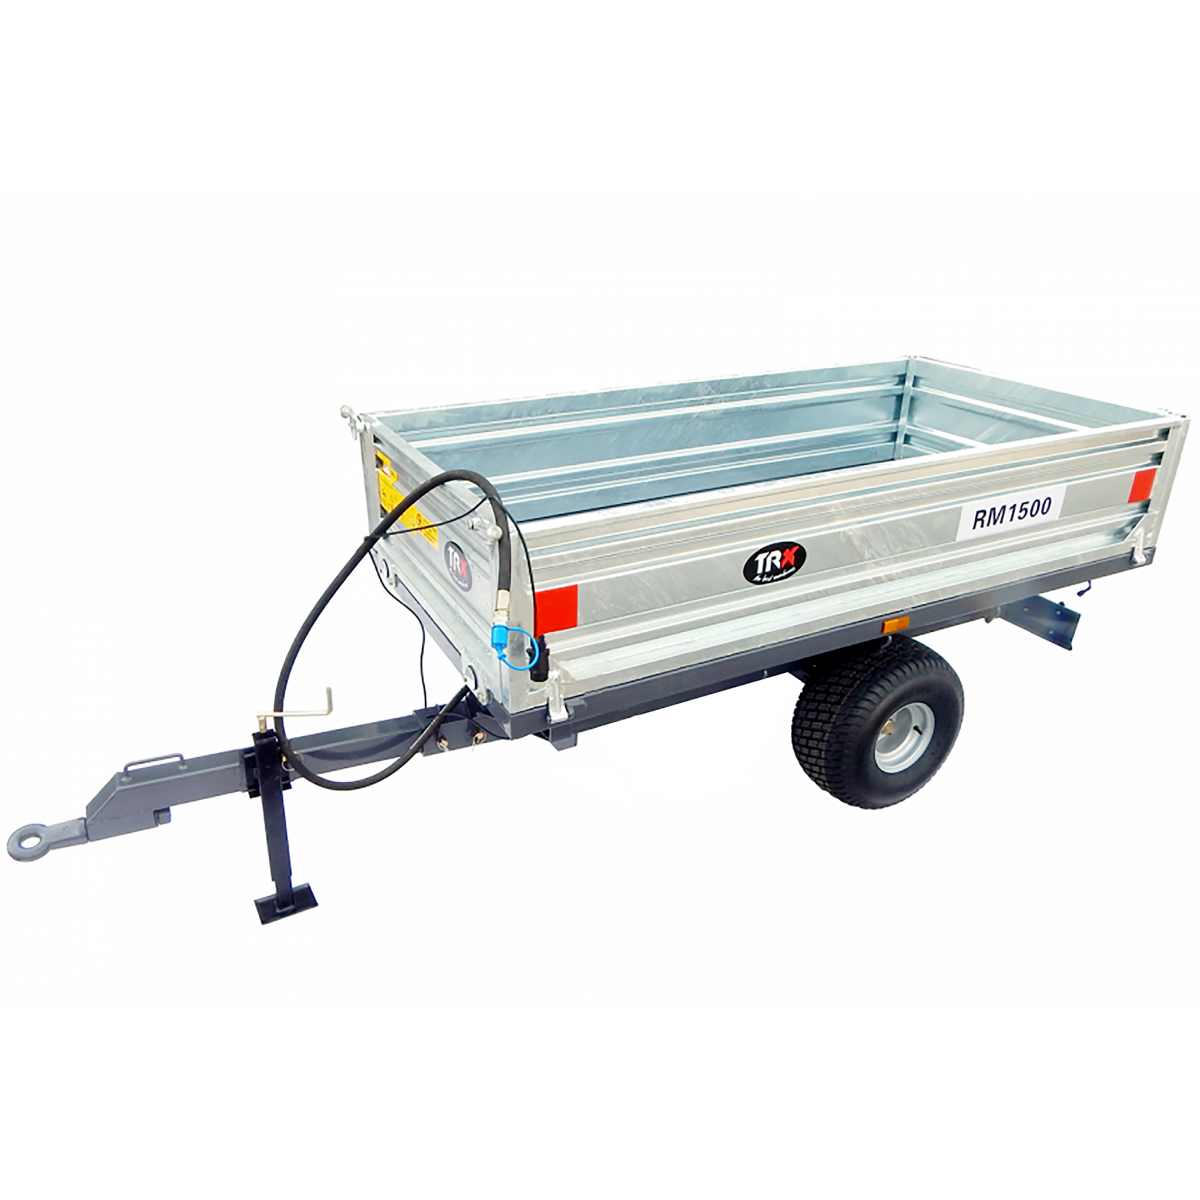 Single-axle agricultural trailer 1.5T BIG with TRX lighting